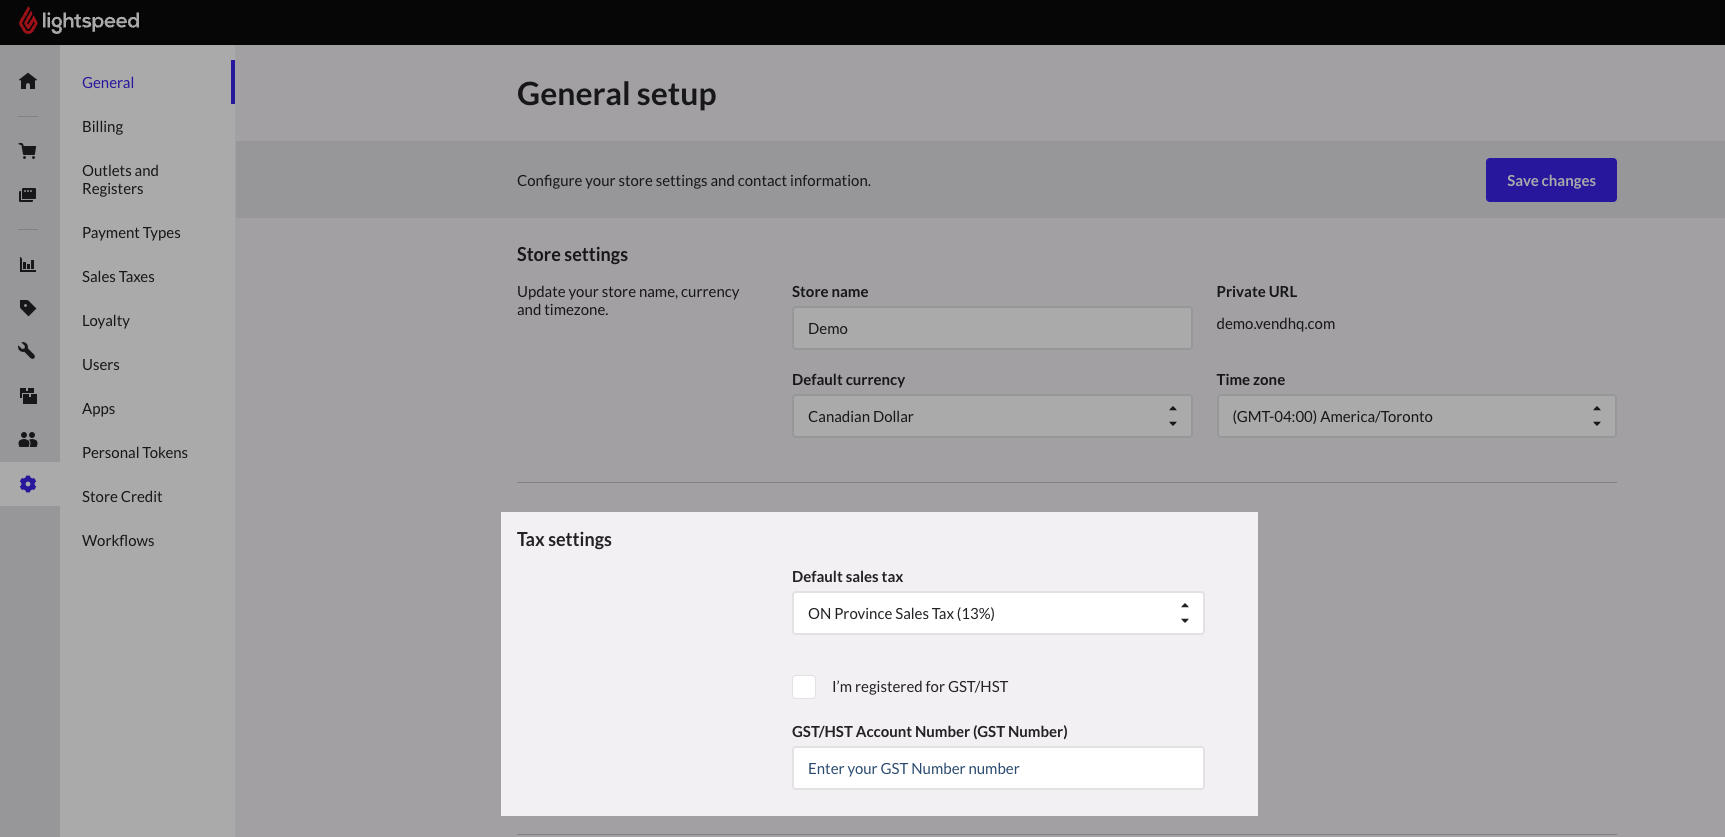 Tax settings section showing default sales tax and optional GST/HST options